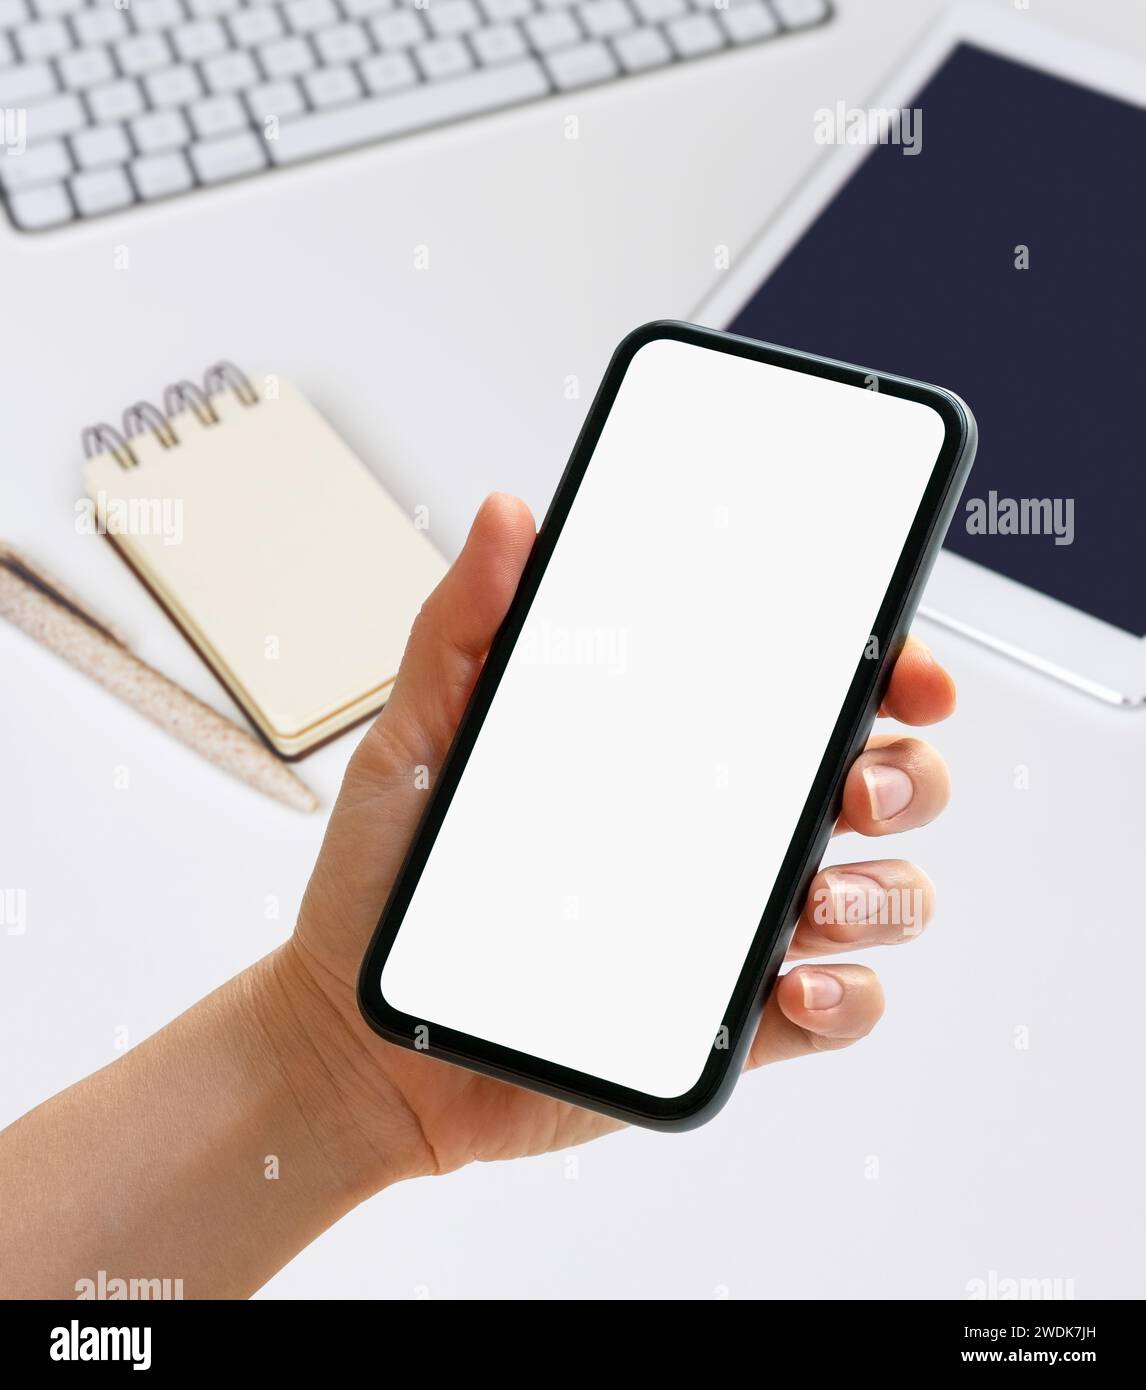 Mockup mobile app digital organizer. Hand holding phone with blank screen in front of diary, digital tablet and pc on the desk. Stock Photo